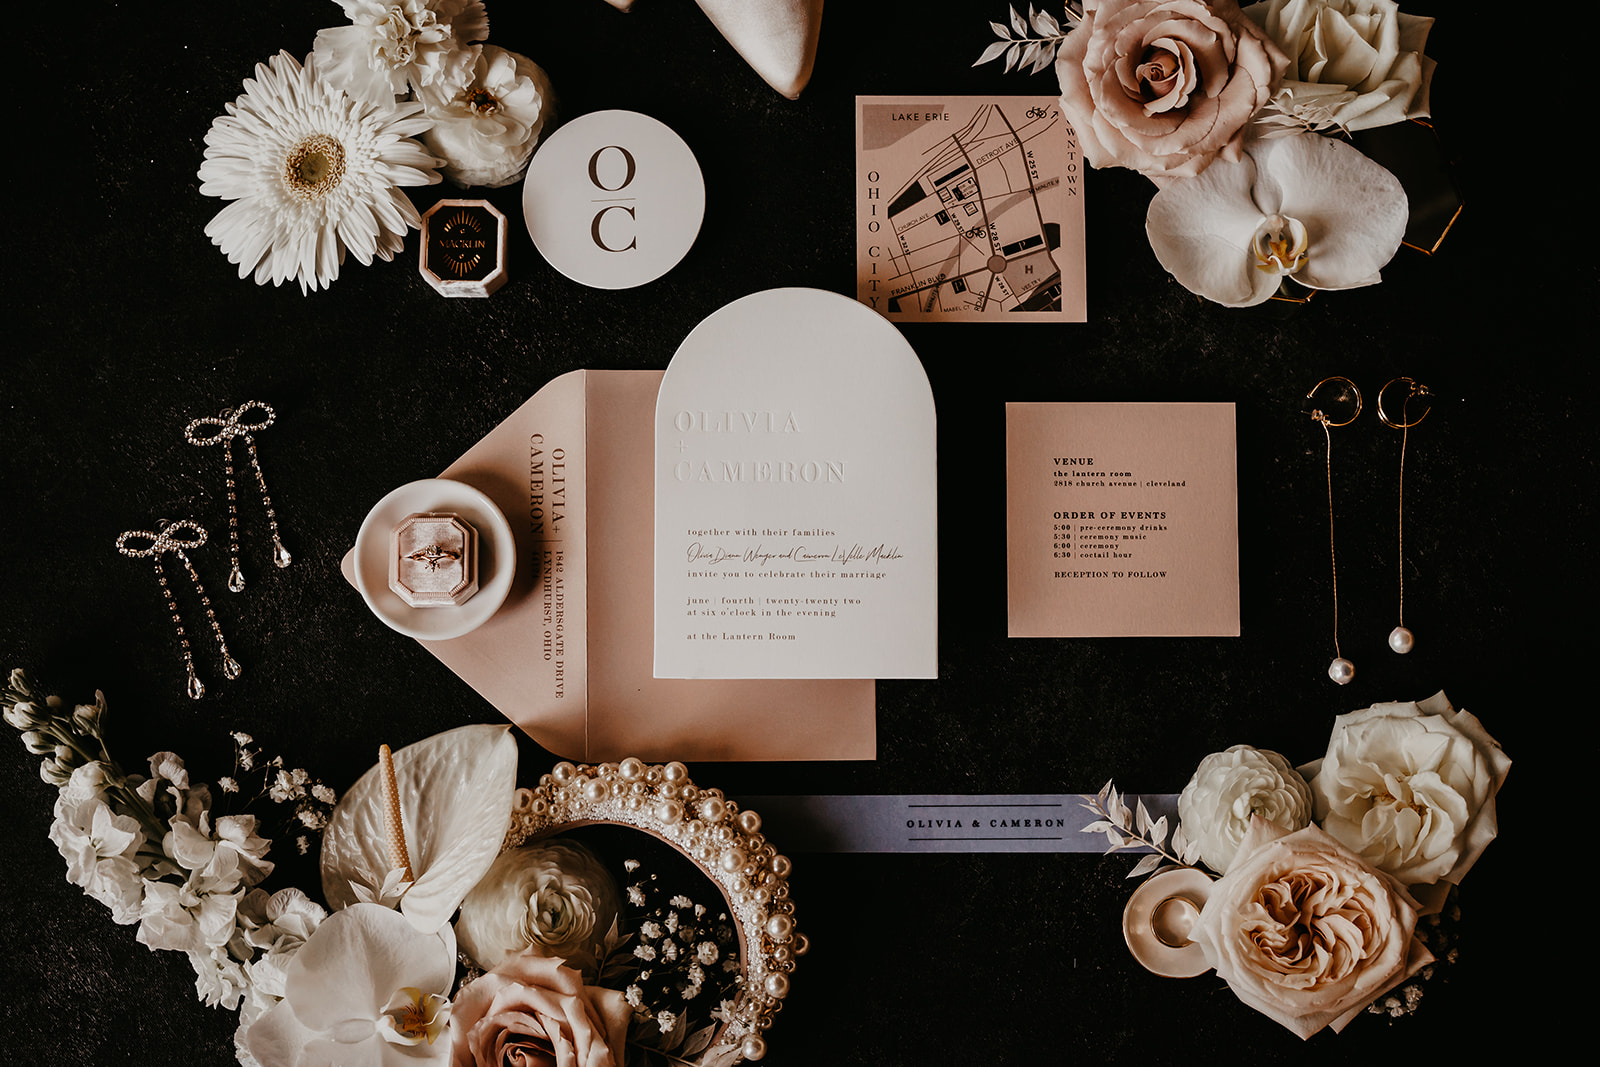 Artfully composed flat lay capturing the elegant wedding invitations, rings, and floral arrangements - setting the tone 